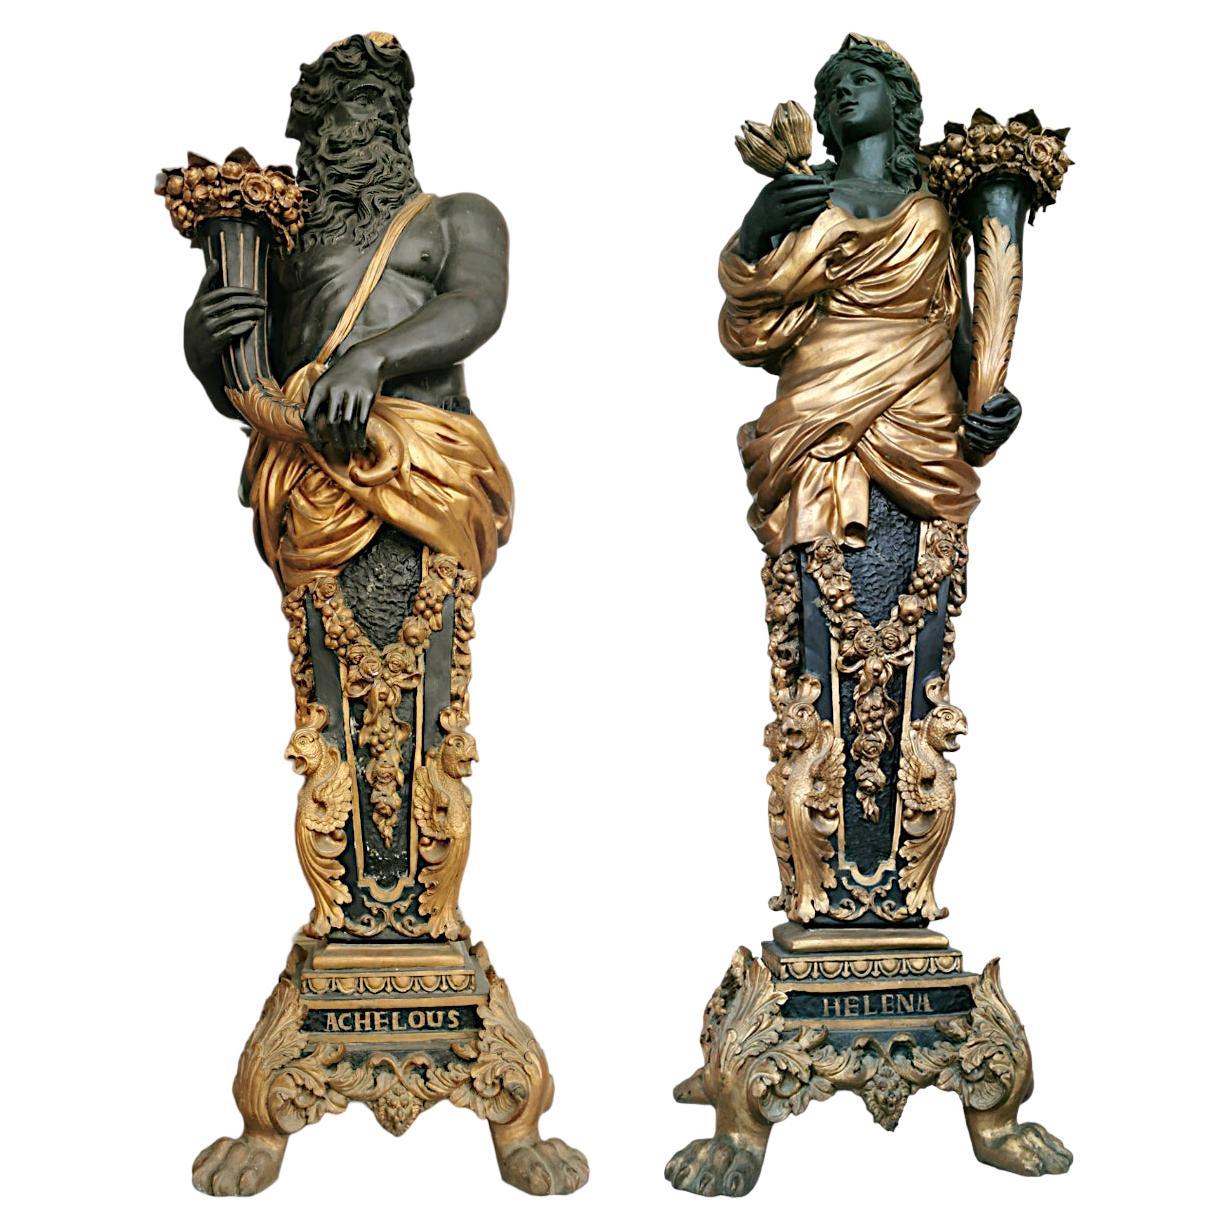 Important pair of sculptures depicting Achello and Helena (mythological famous figures) in bronze, made with the lost-wax technique, dating from the 19th century (second half of the 1800s but made in the Empire style).

Standing on a quadrangular